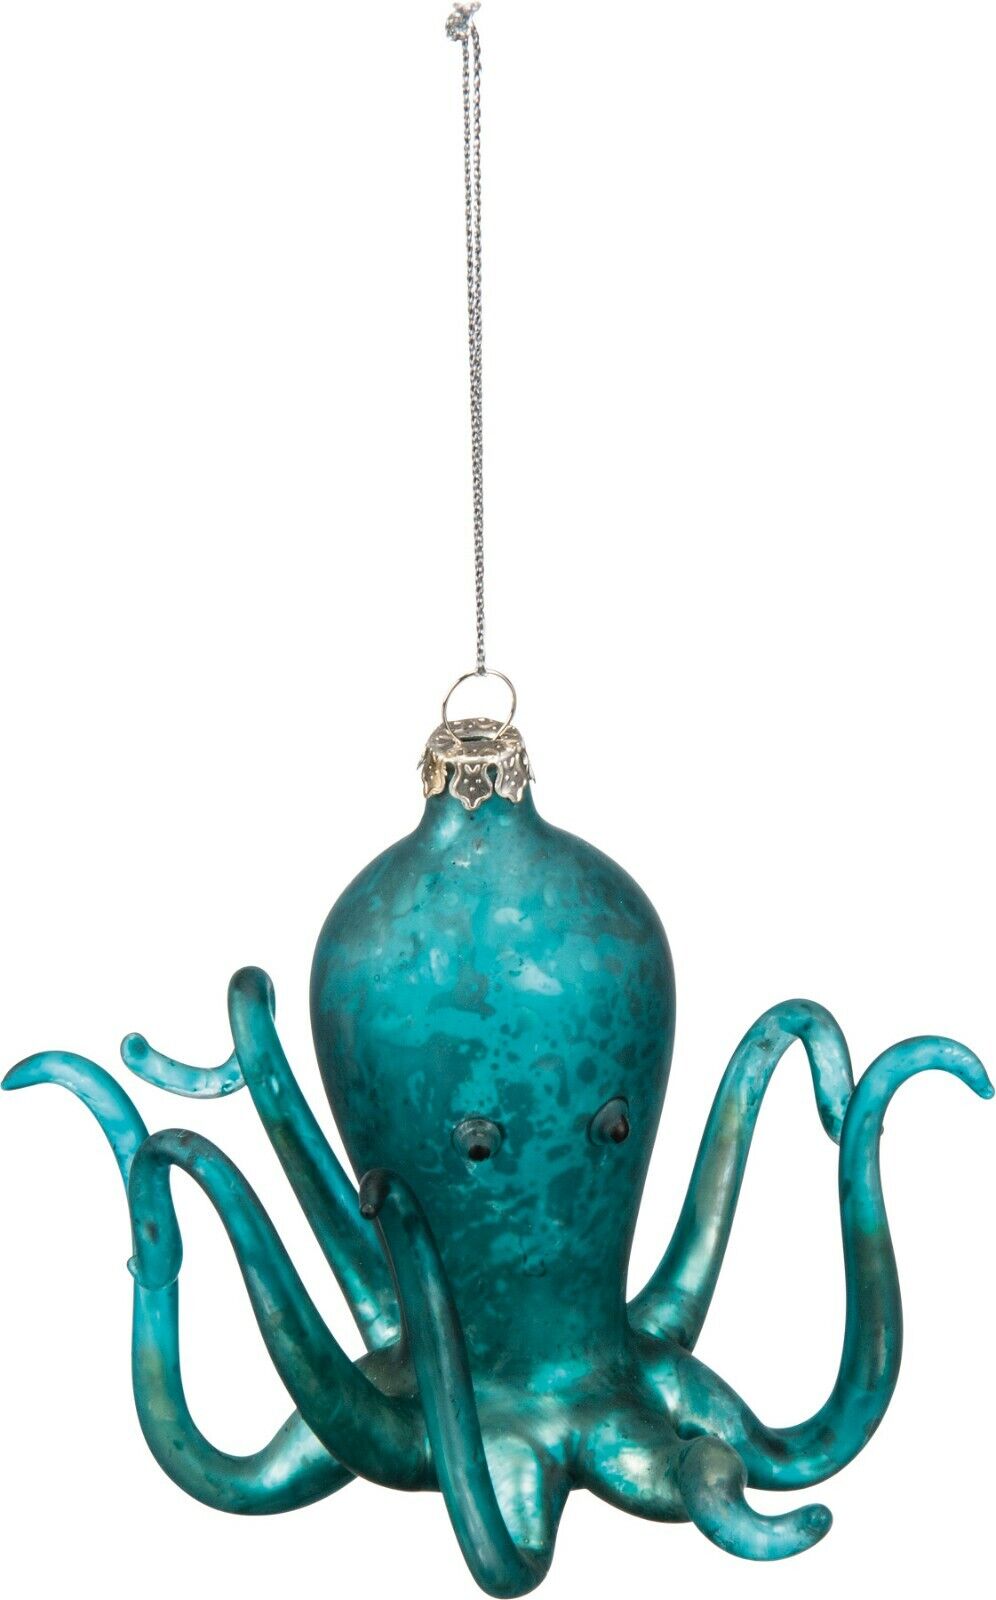 Primitives By Kathy Blue OCTOPUS GLASS ORNAMENT NEW Christmas Holiday Beach